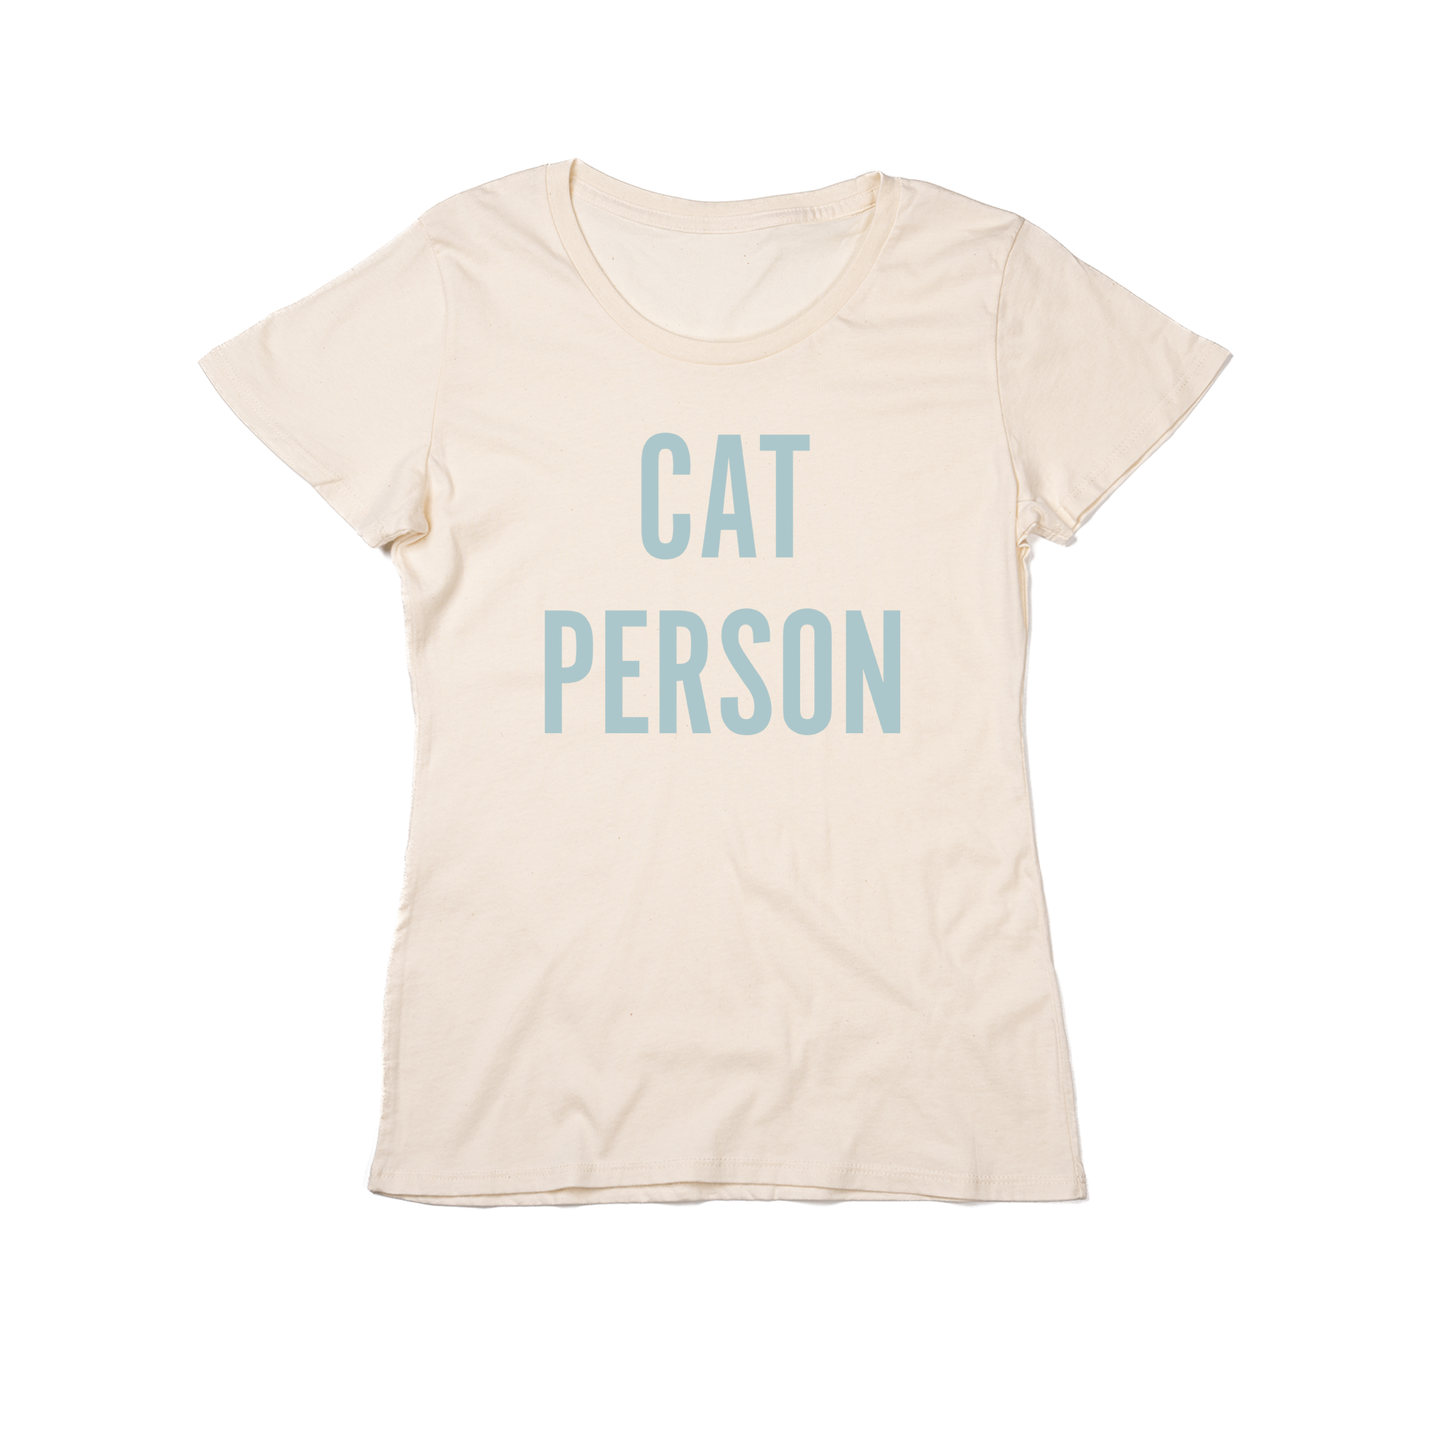 Cat Person (Sky) - Women's Fitted Tee (Natural)